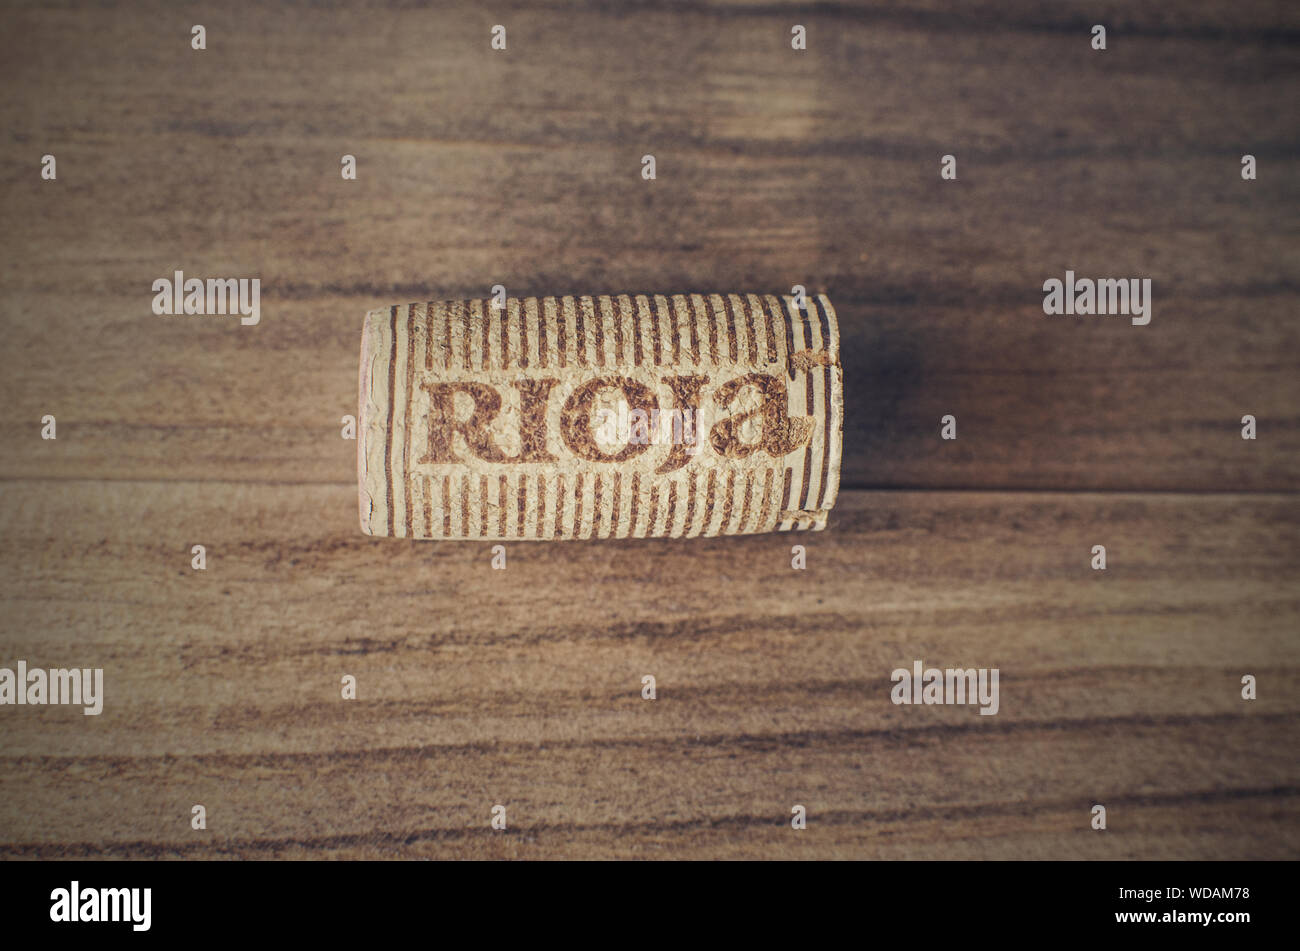 Rioja (Spain's most famous wine region) wine cork stopper on a wooden background. Stock Photo